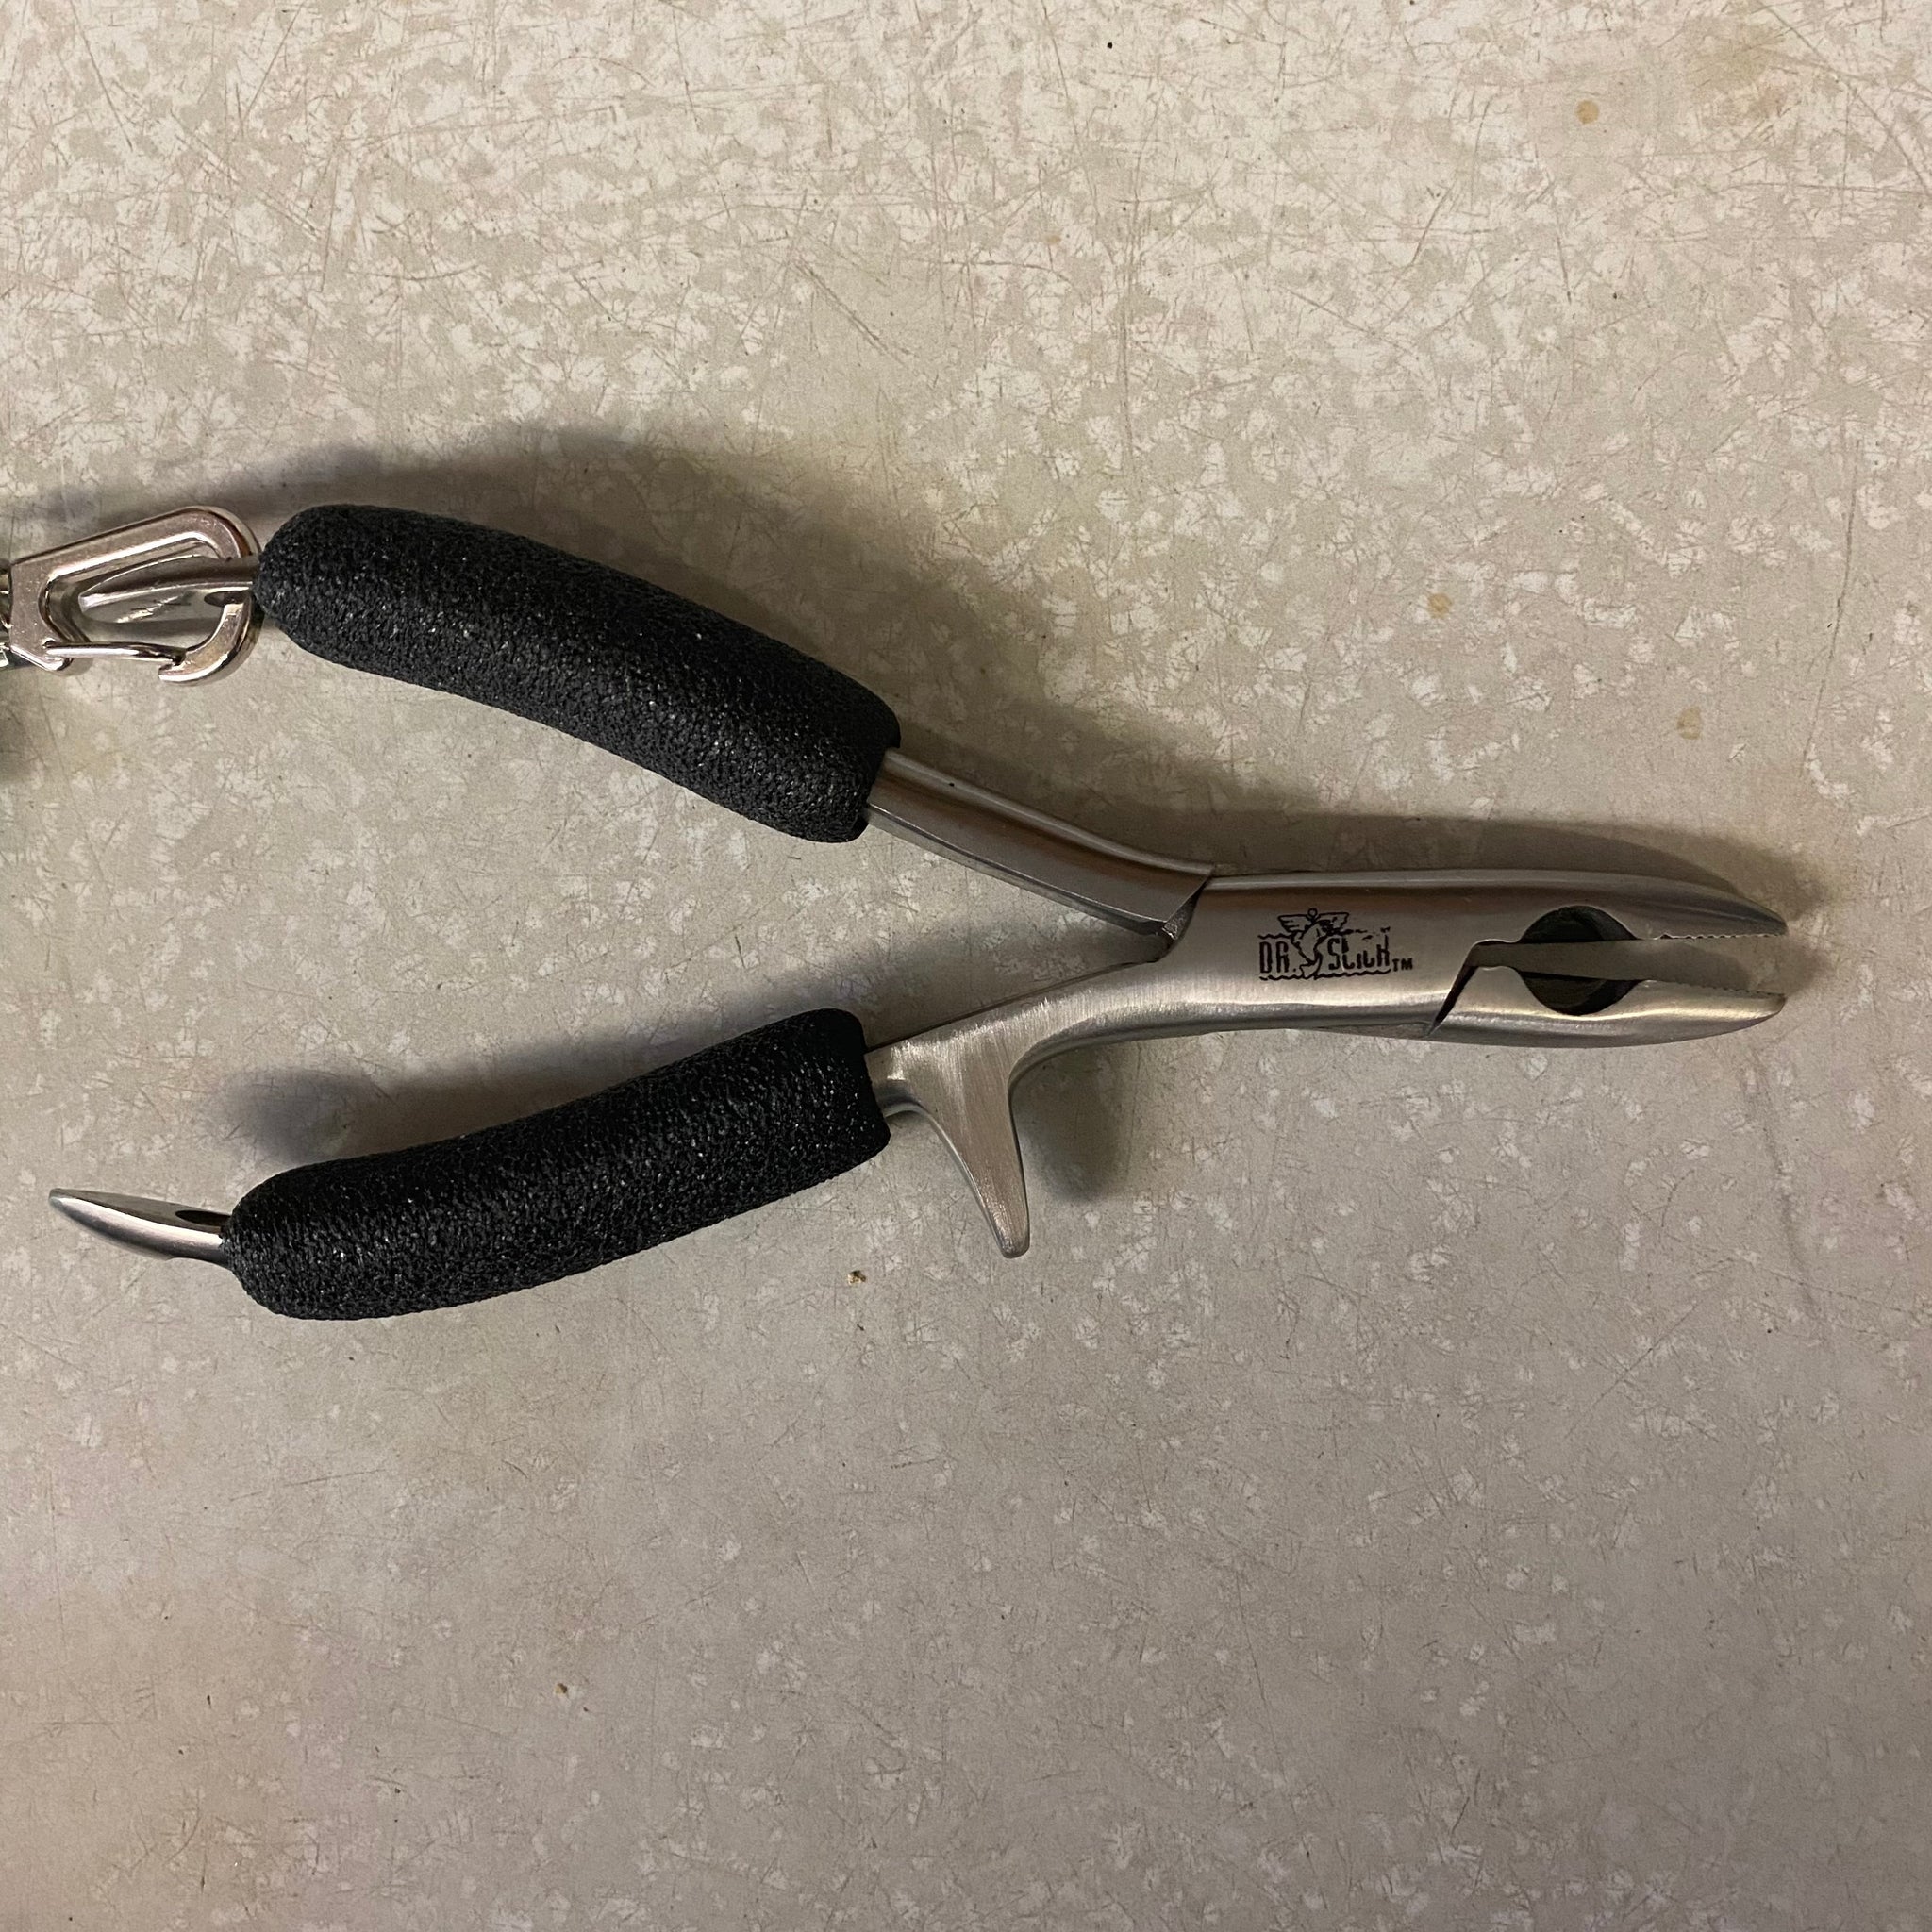 Dr. Slick Typhoon Pliers, Fishing Pliers, Saltwater Fly Fishing Pliers, For Sale Online At The Fly Fishers, Best Price